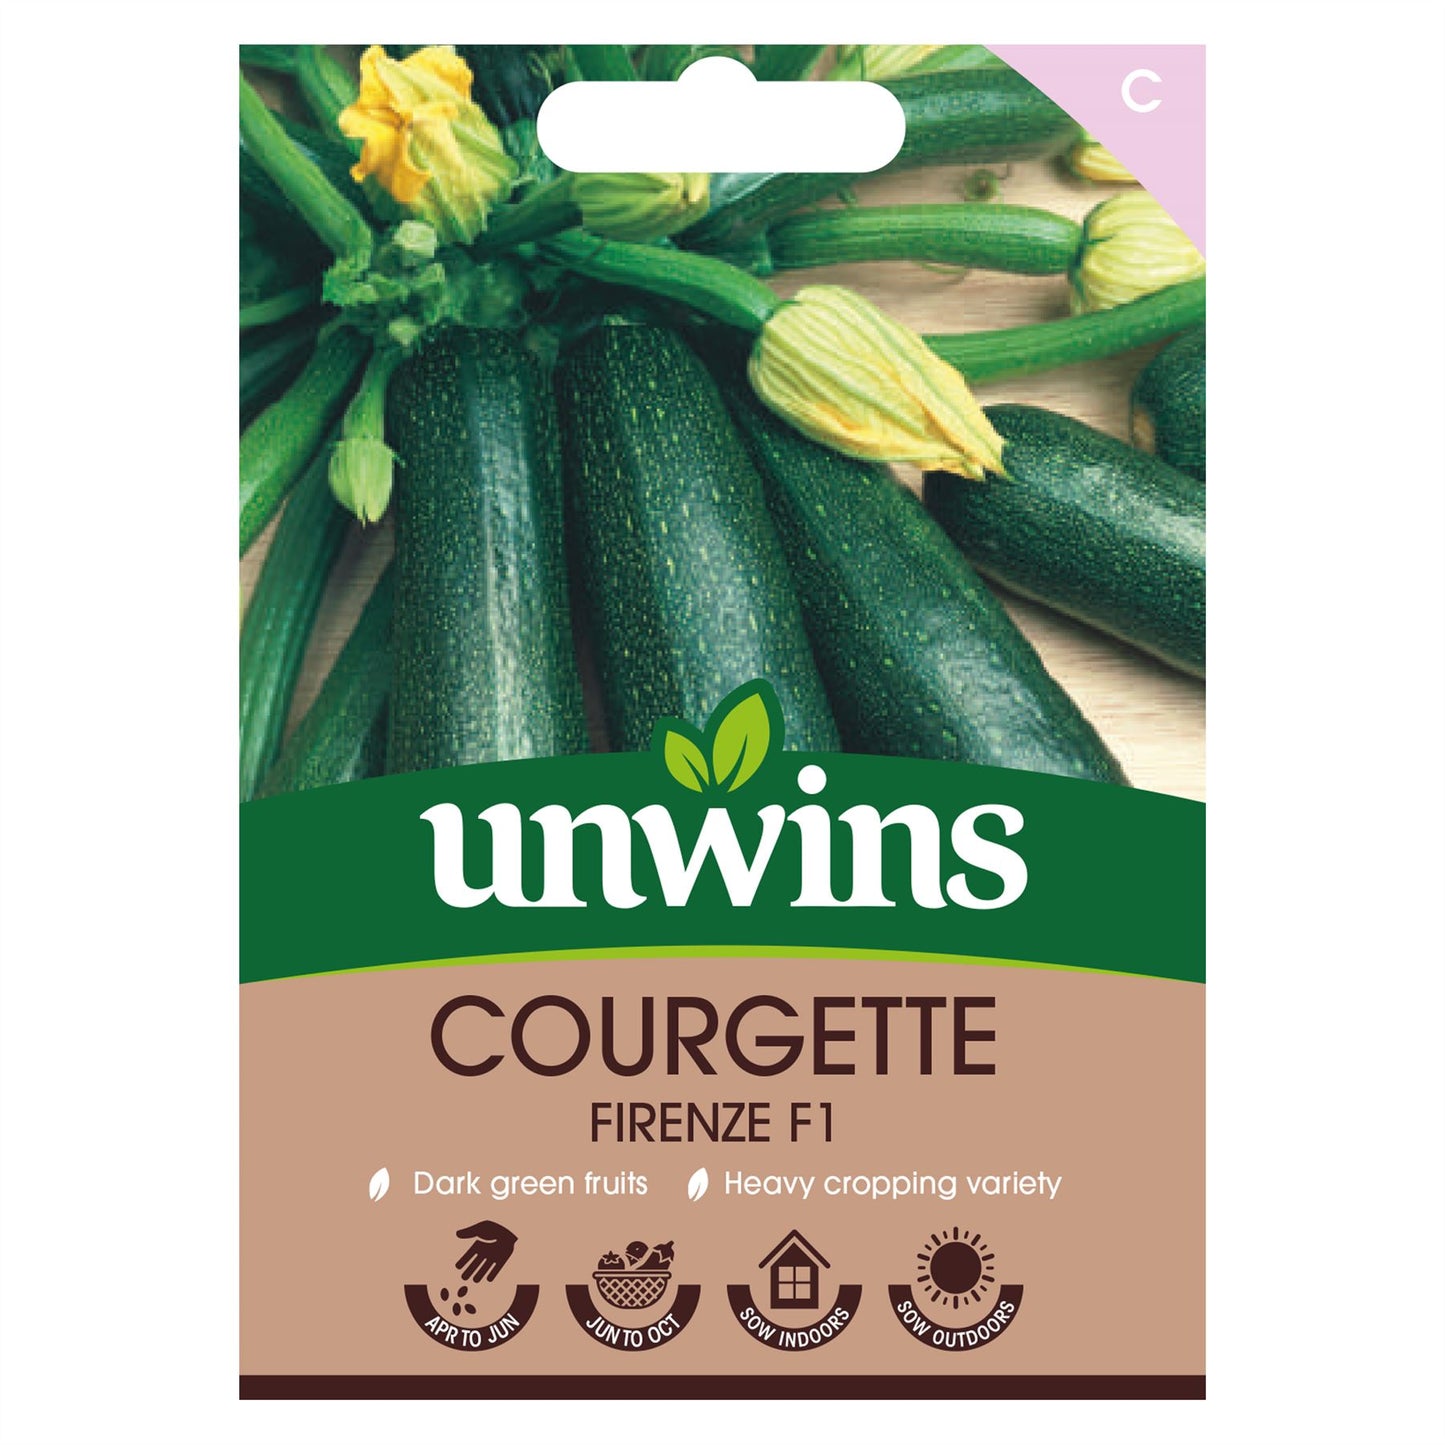 Unwins - Vegetable - Courgette Firenze F1 Seeds